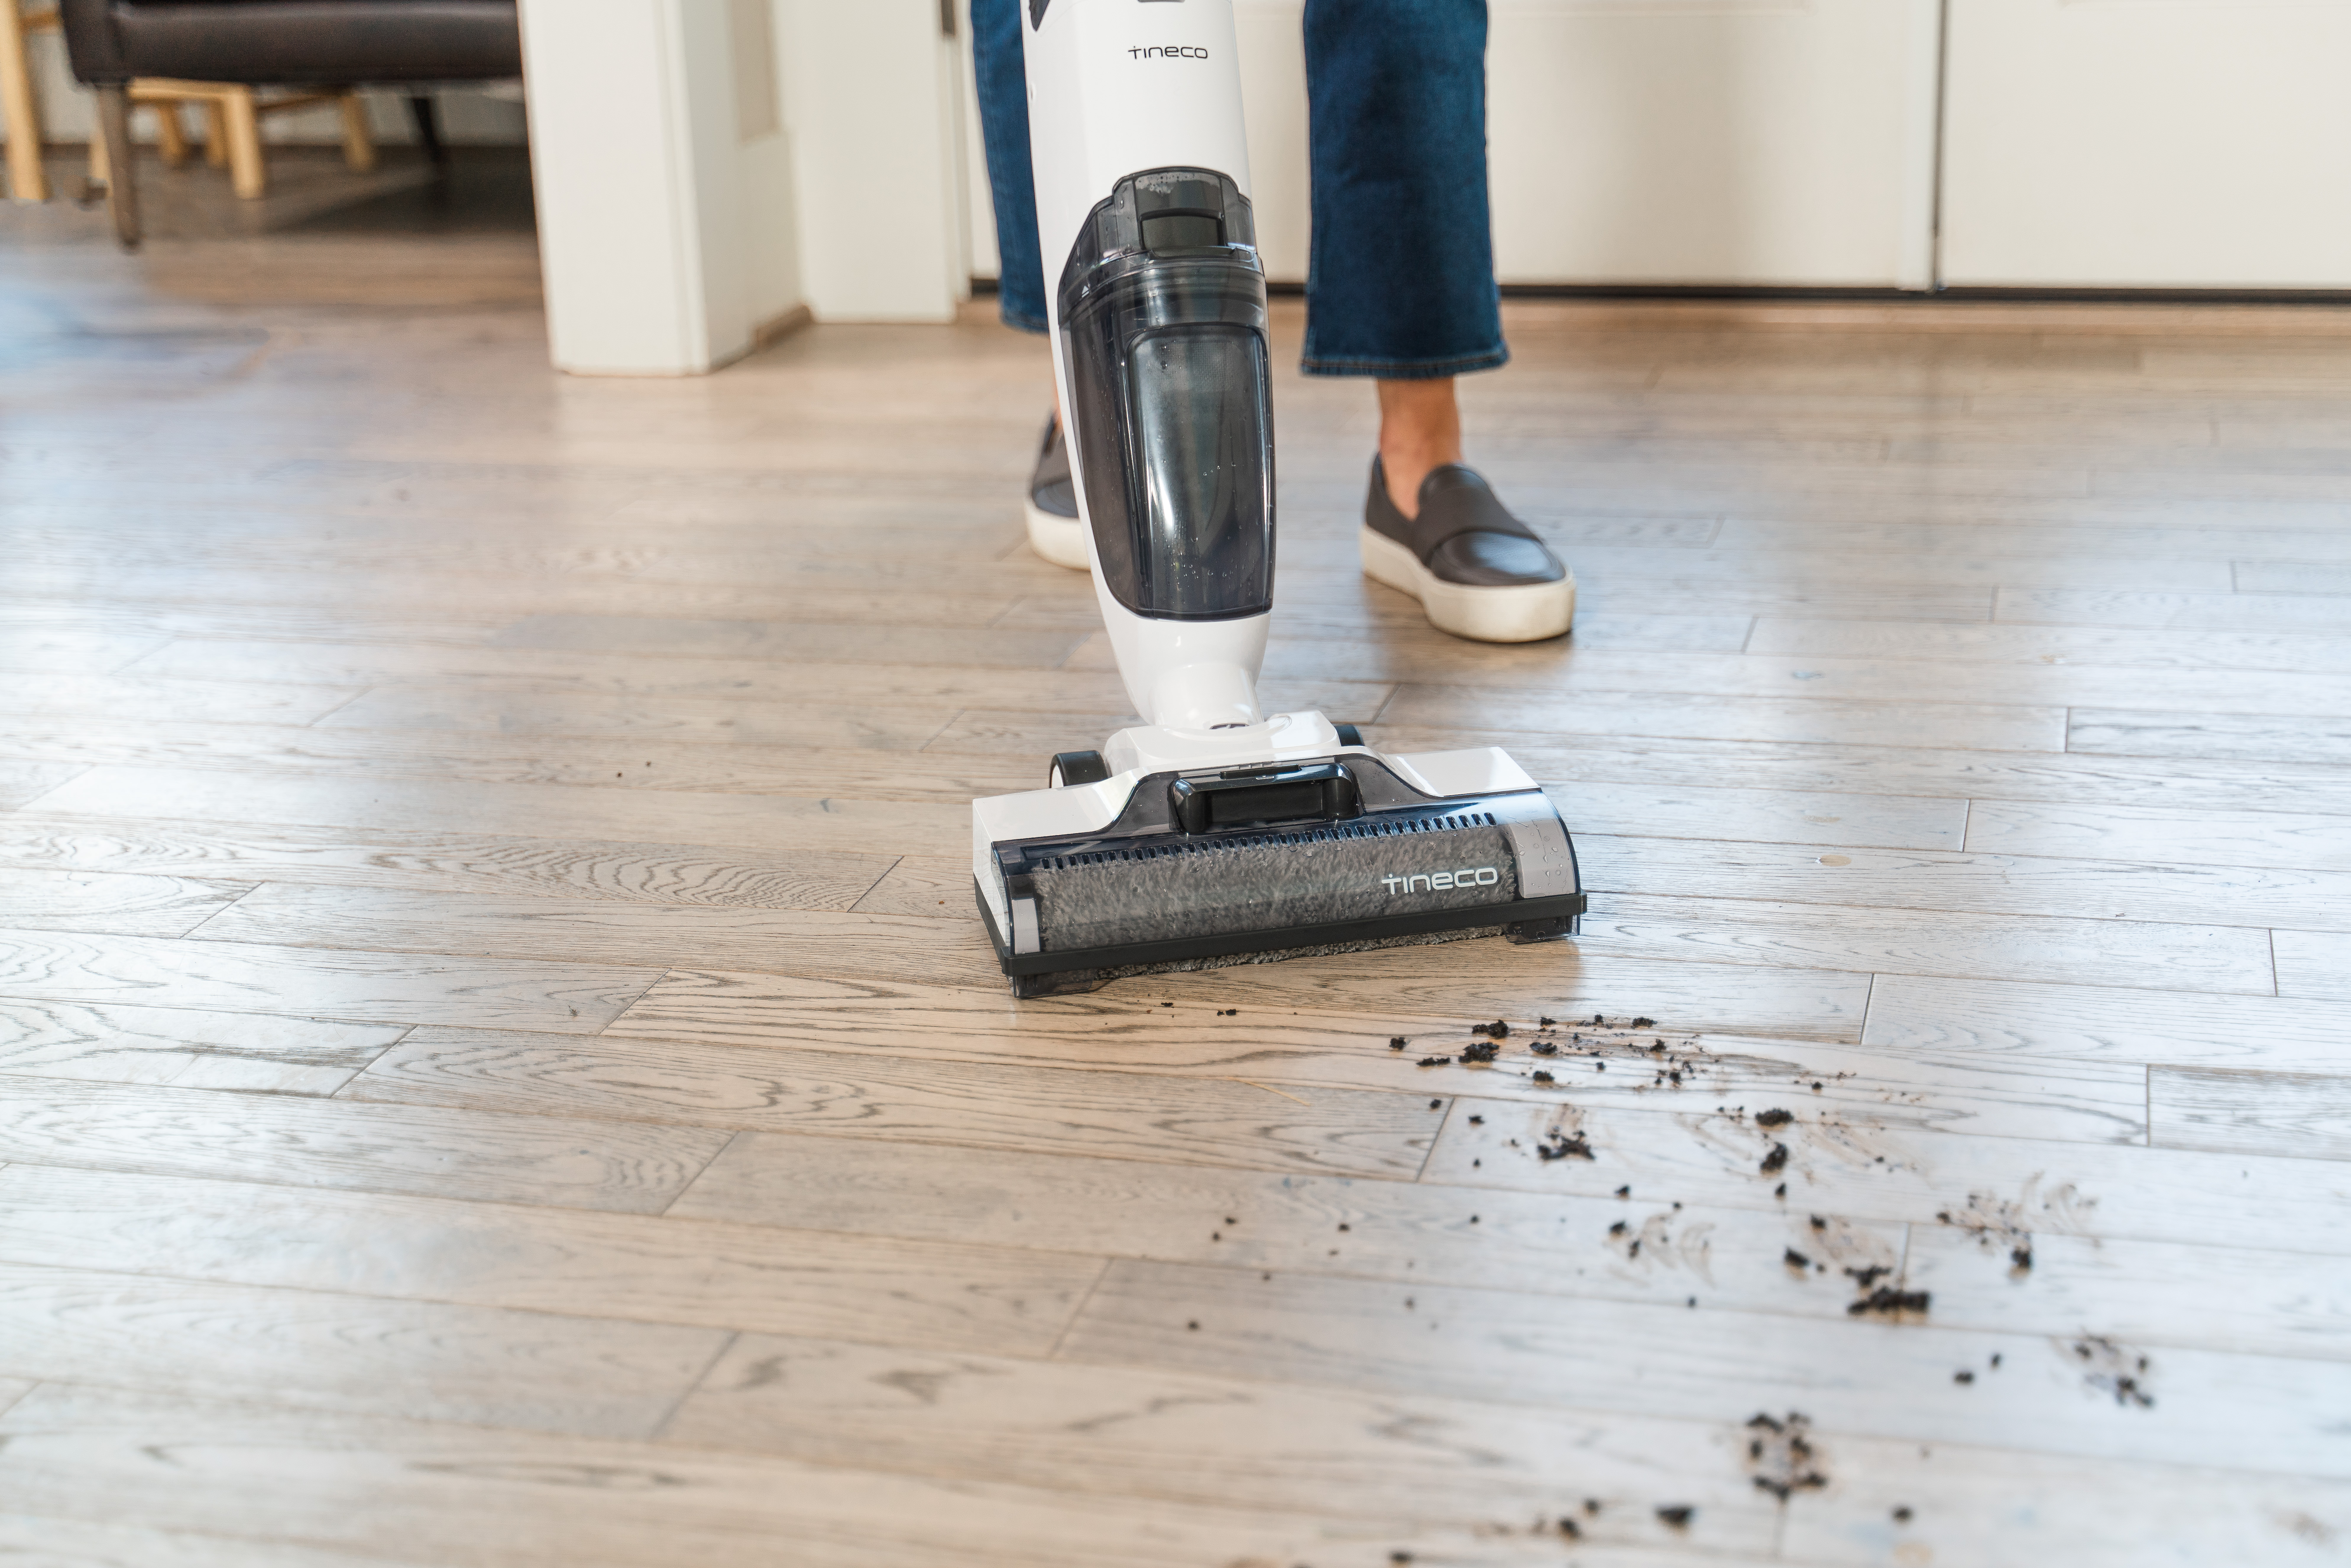 Tineco iFloor 2 Max Cordless Wet/Dry Vacuum Cleaner and Hard Floor Washer - Limited Edition (Blue)